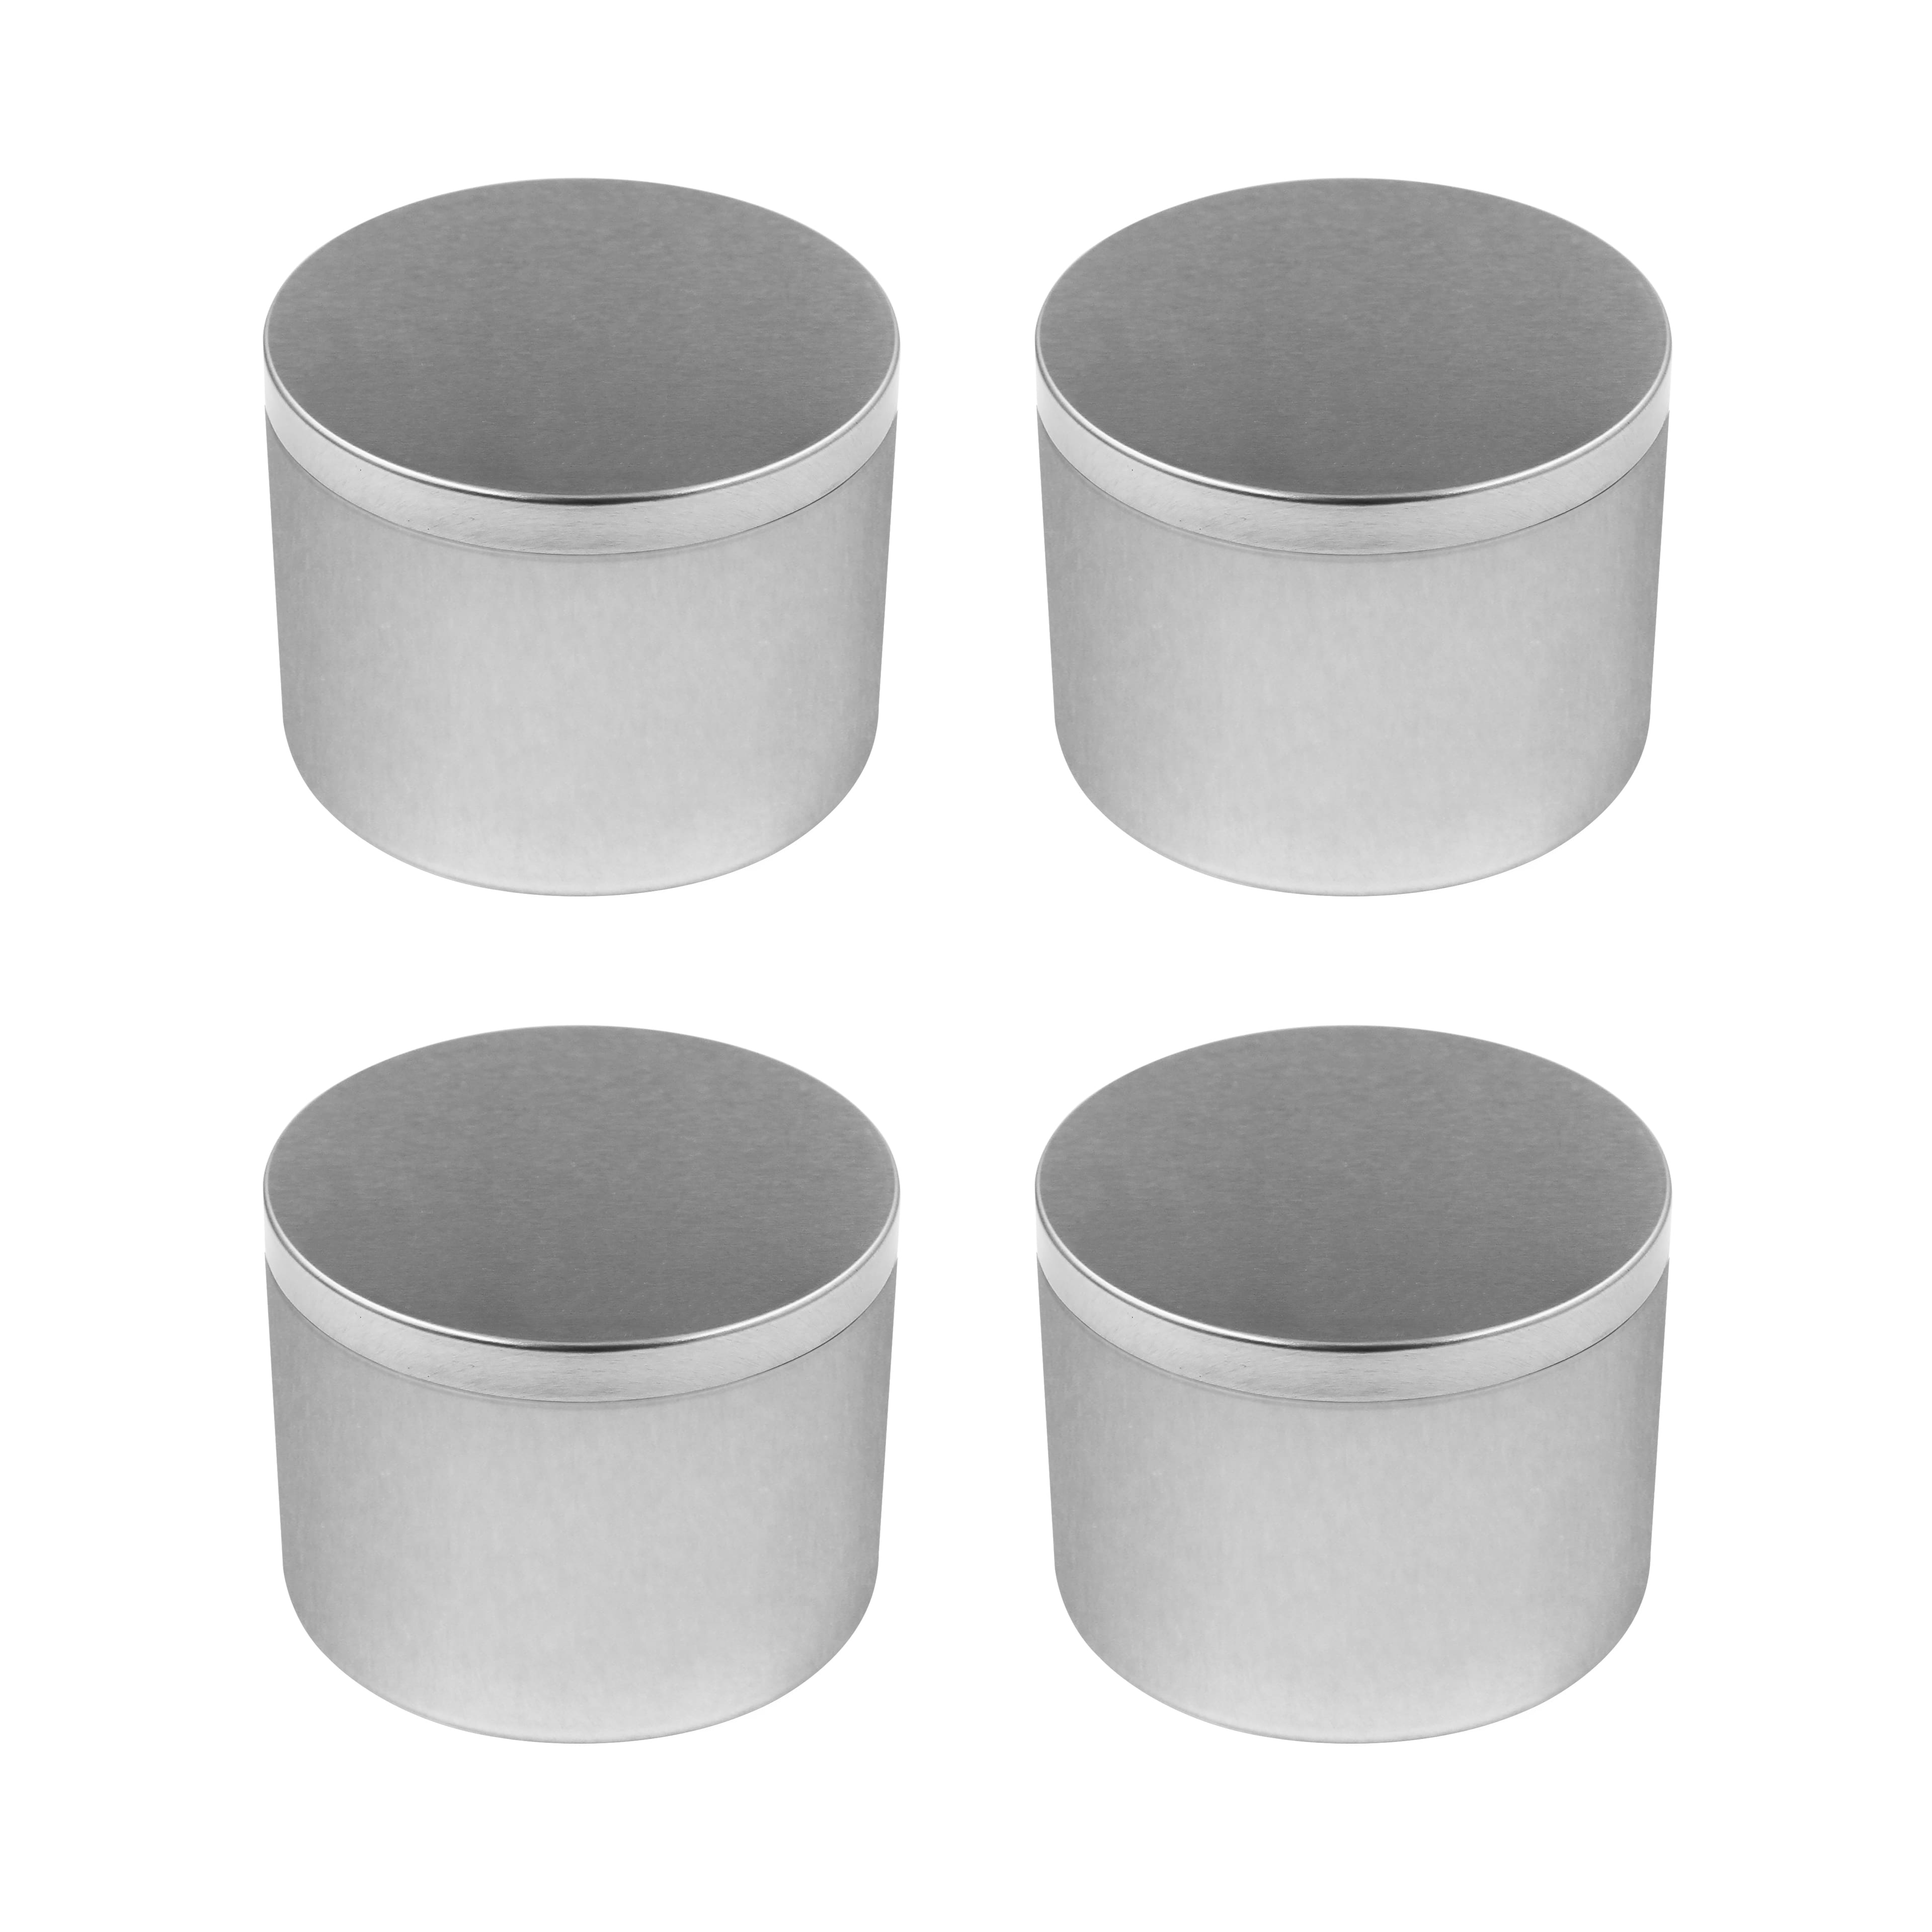 8 Packs: 4 ct. (32 total) 6oz. Silver Candle Making Tins by Make Market&#xAE;